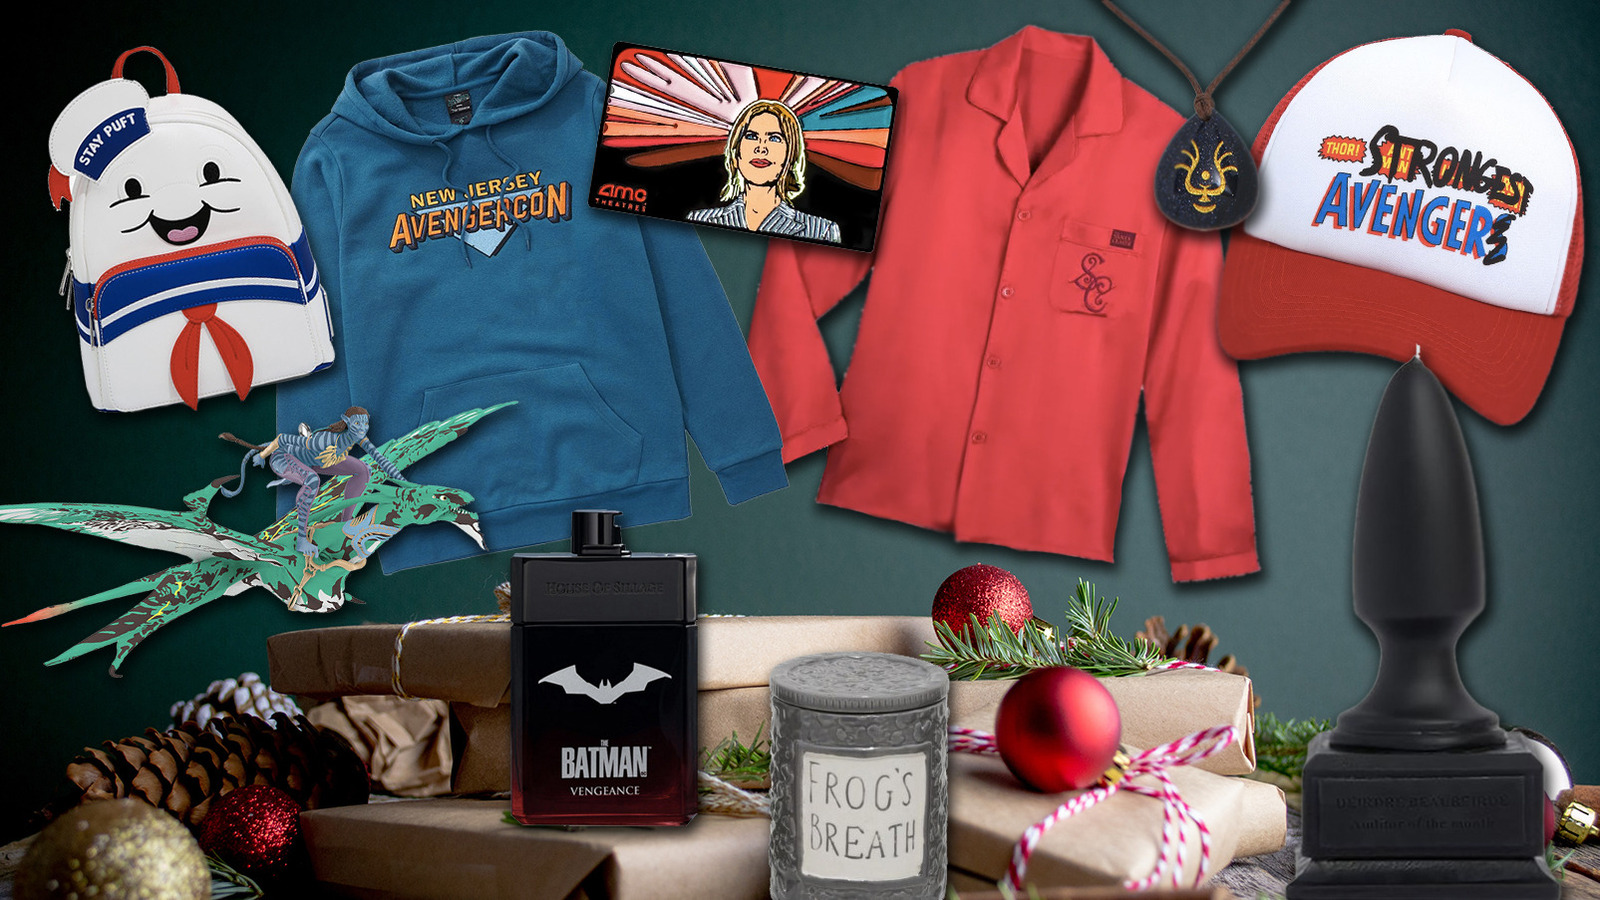 https://www.slashfilm.com/img/gallery/the-2022-film-holiday-gift-guide-part-5-movie-tv-clothing-geeky-housewares-holiday-decorations-more/l-intro-1669397793.jpg